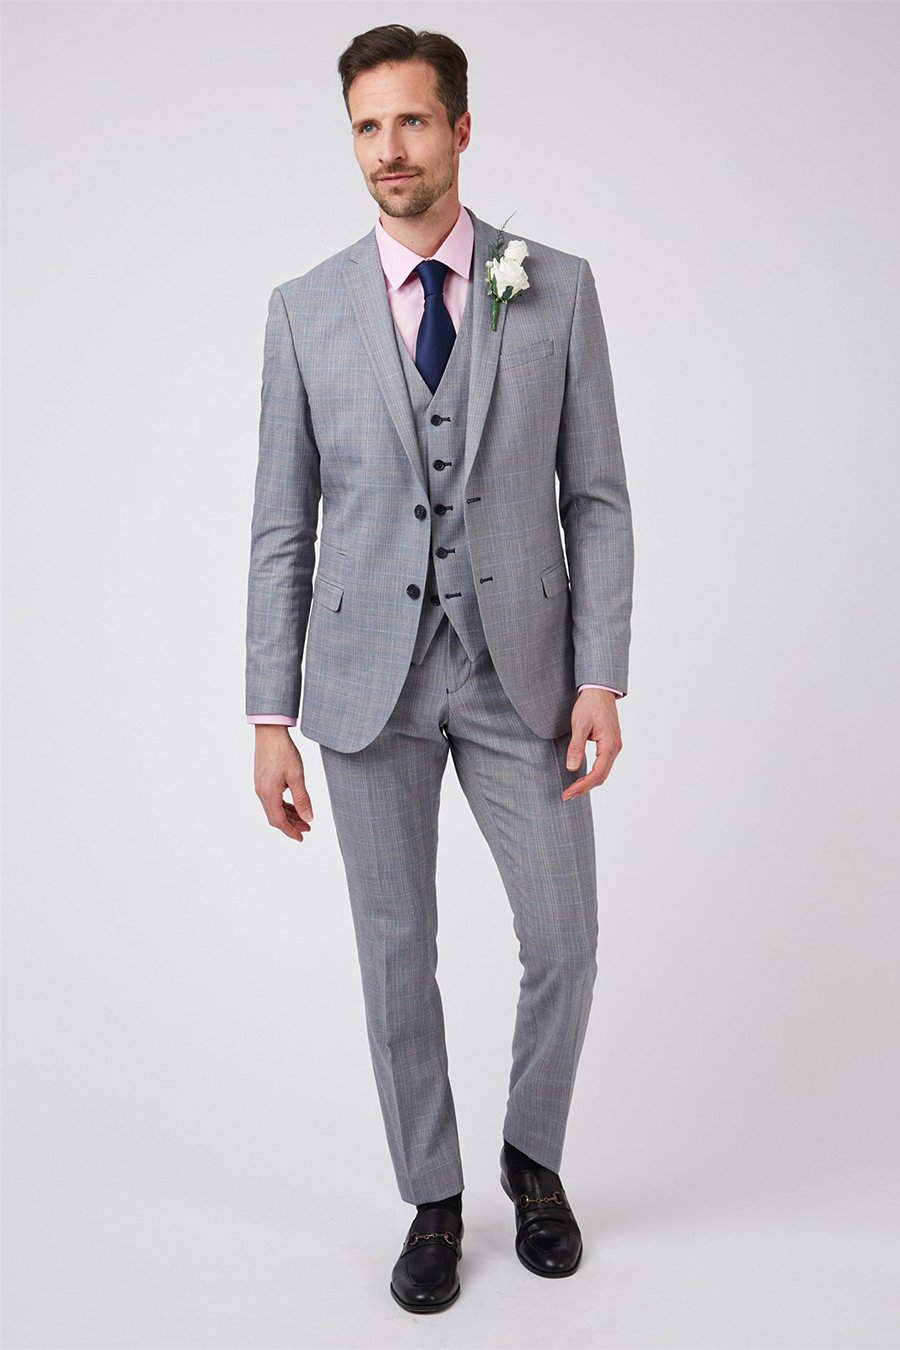 Grey three-piece suit, pink shirt, navy tie, and black loafers